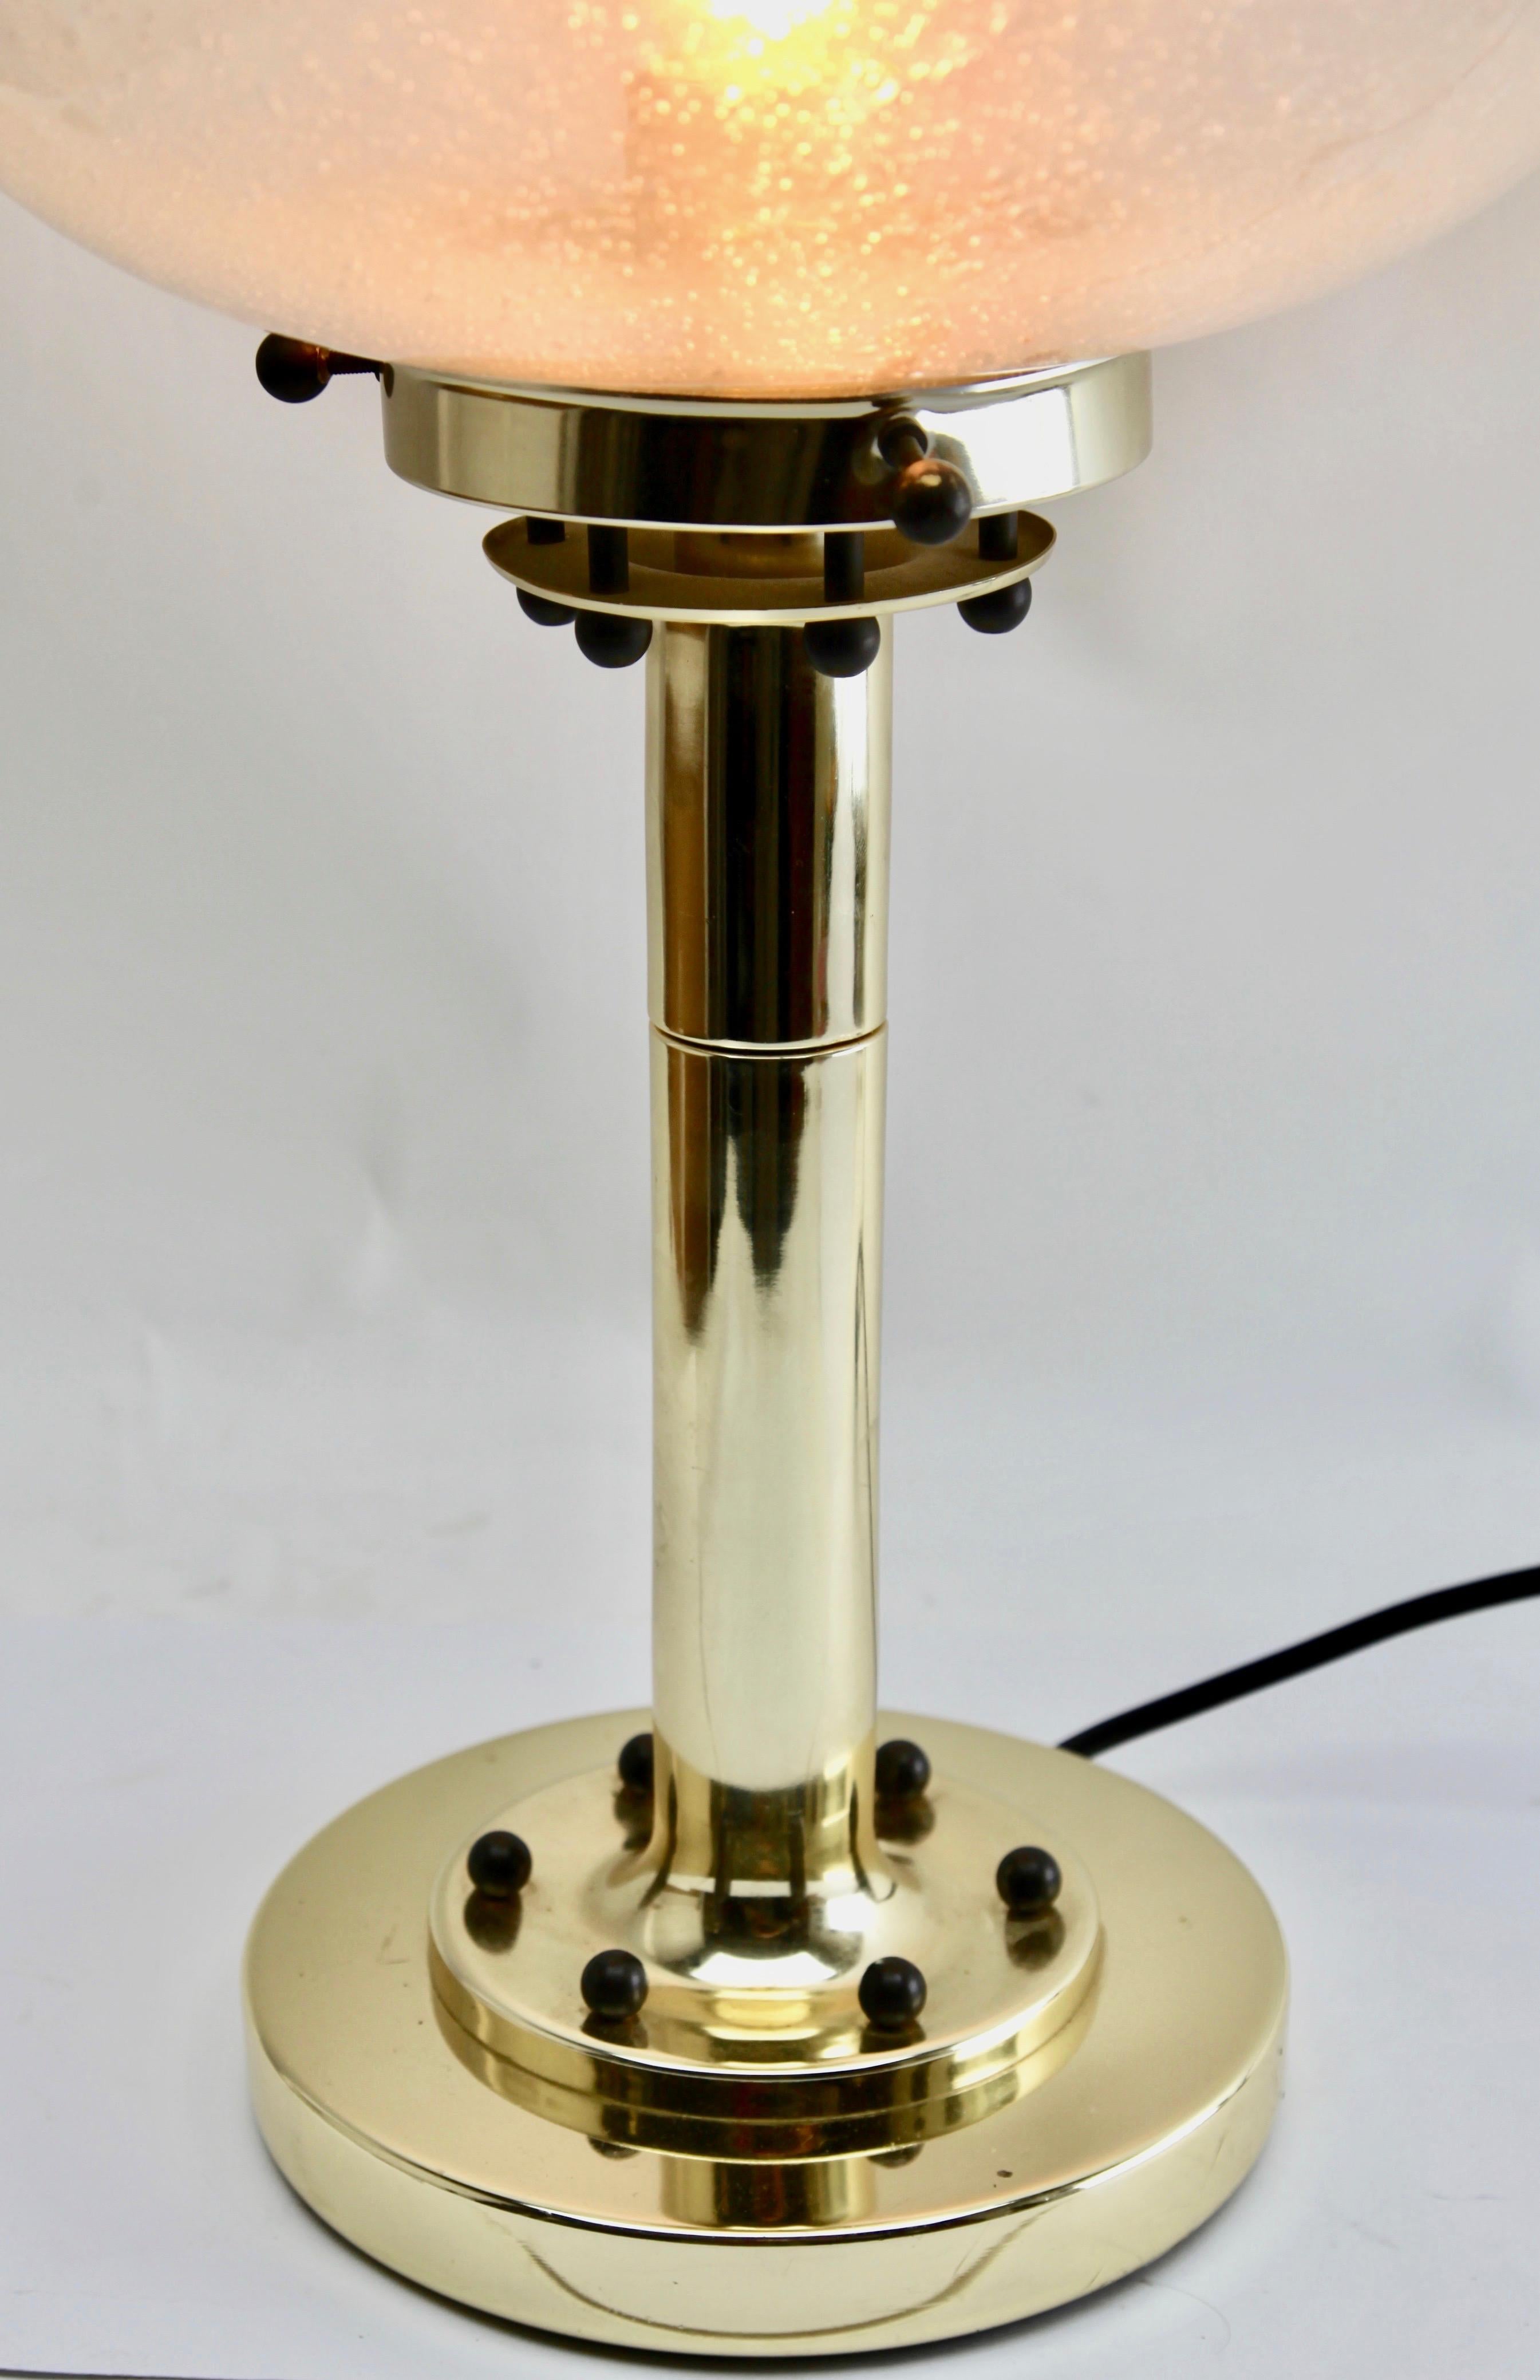 Hand-Crafted Peill & Putzler, Mid-Century Modernist German Table Lamp, 1960s For Sale